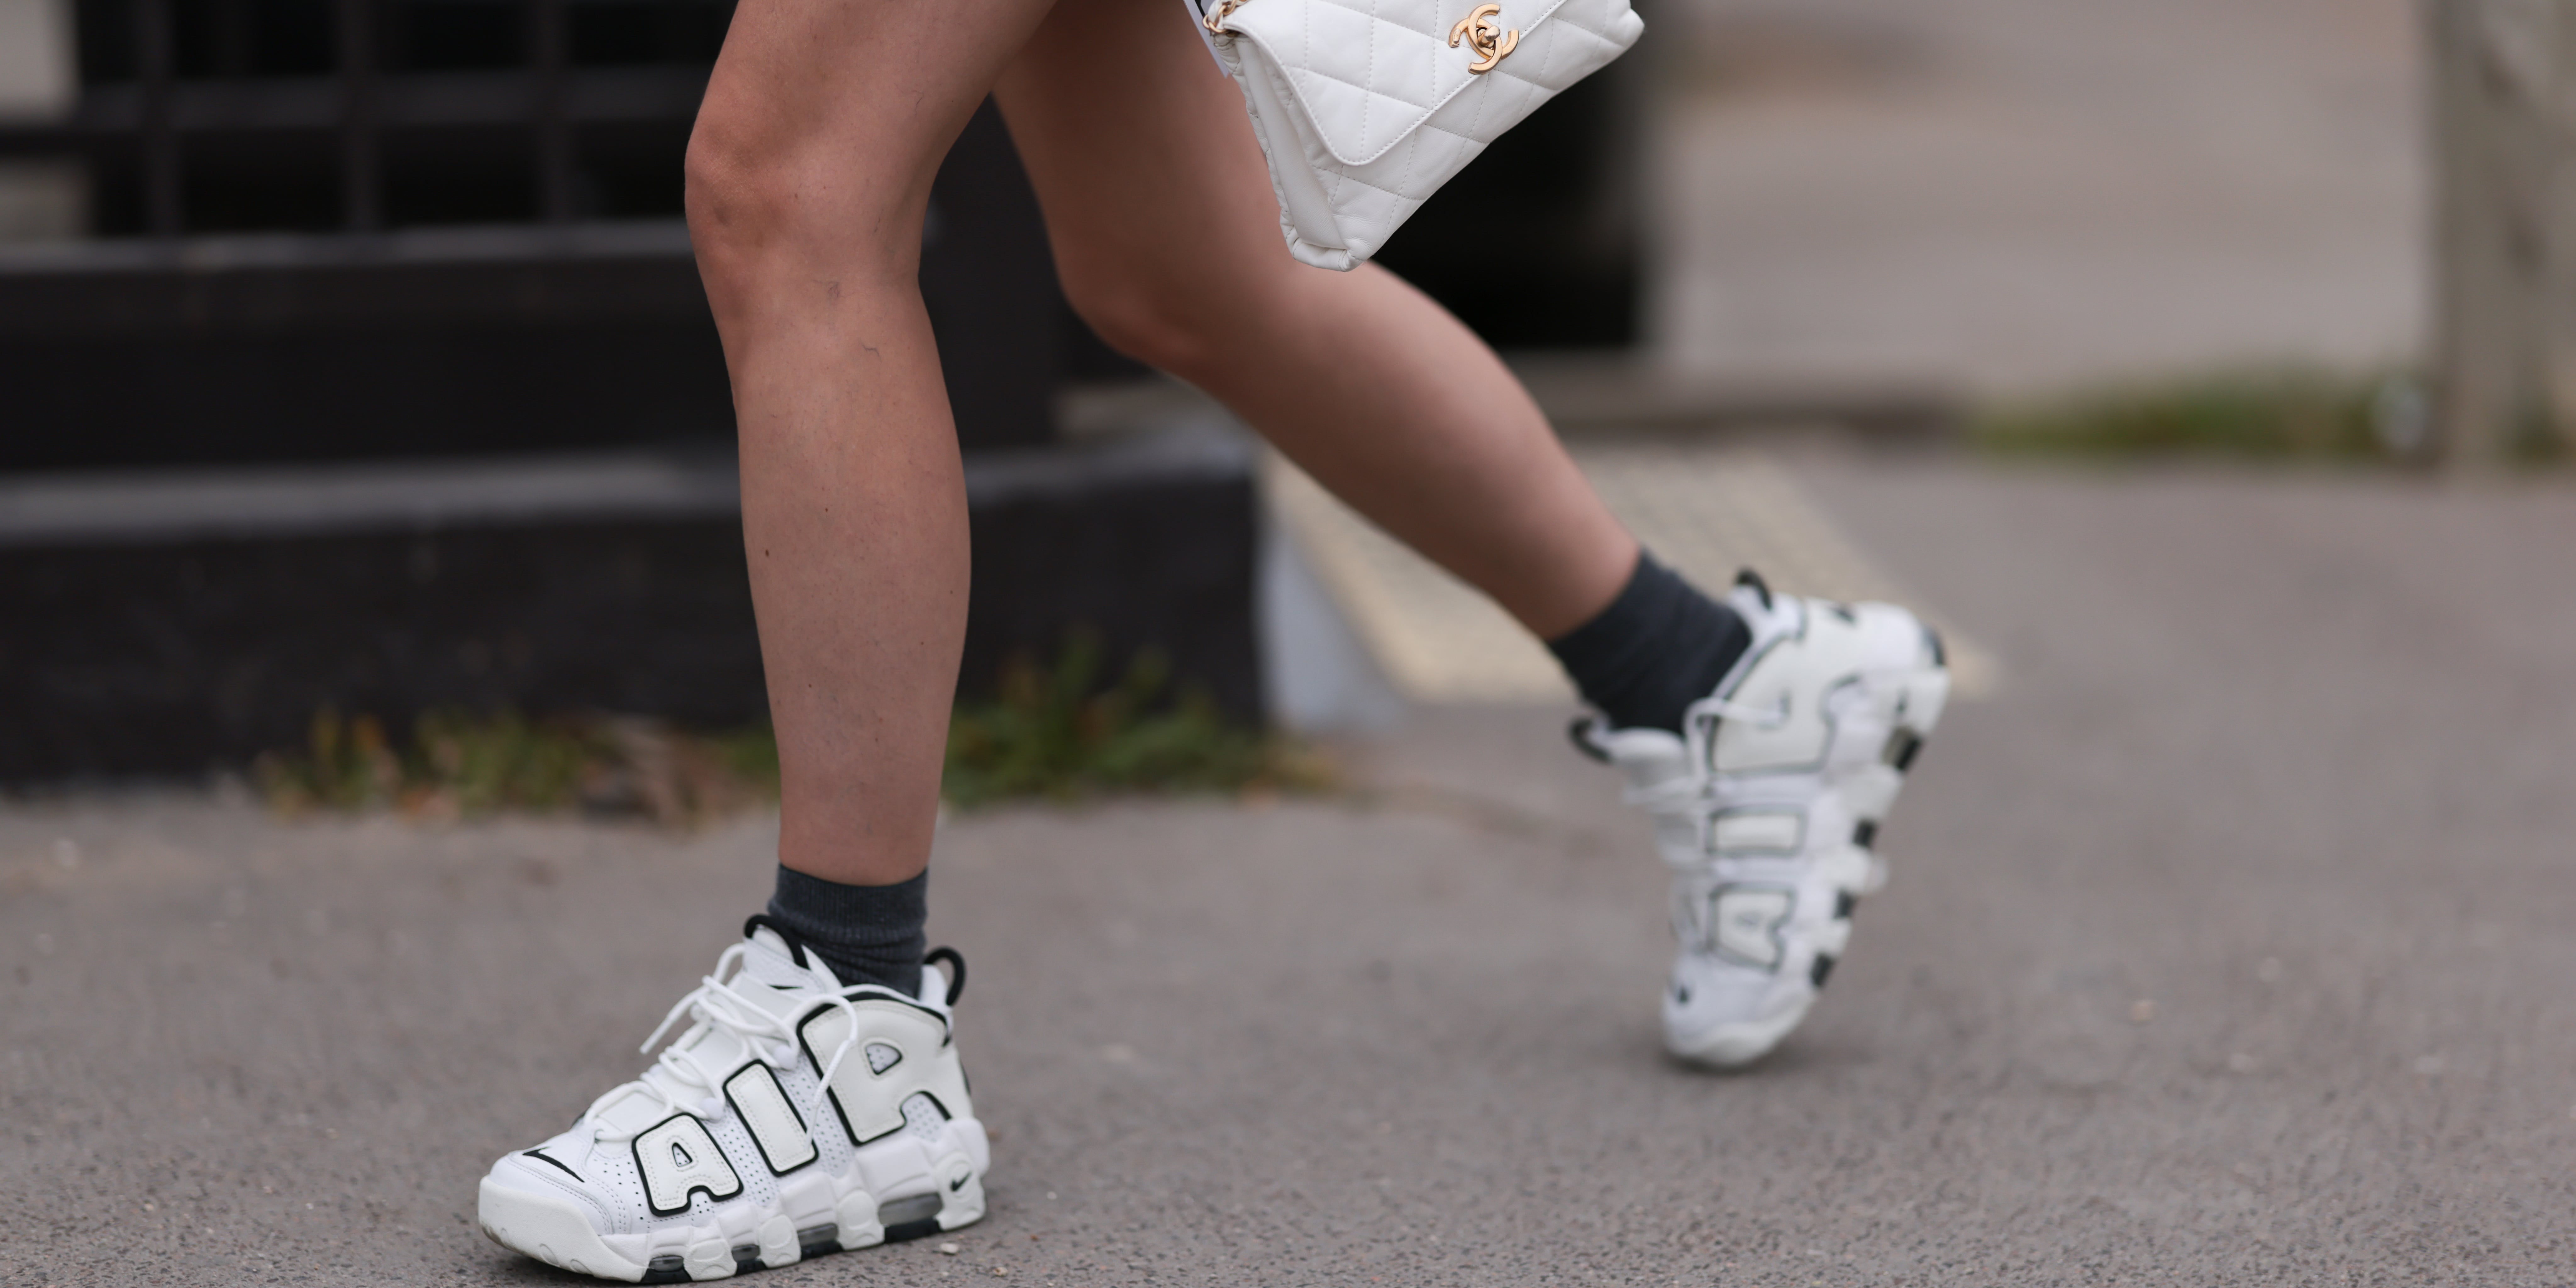 How To Wear Dresses And Sneakers: 11 Cute Outfit Ideas 